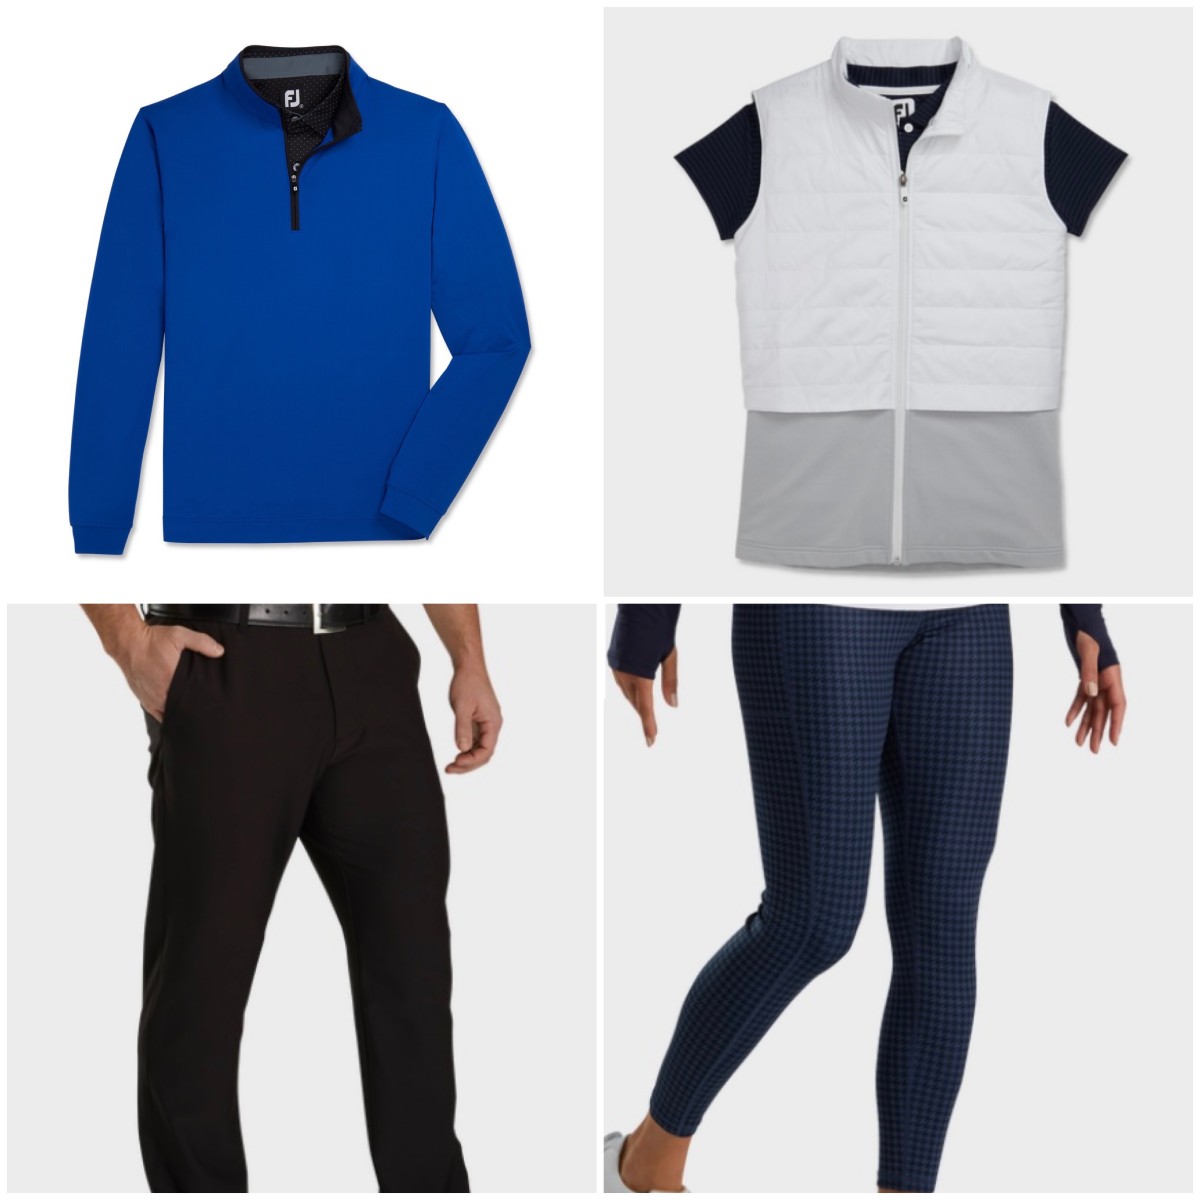 FootJoy's mid-layer paired with pants is a sharp look, while the insulated vest with leggings is a sporty look for women.  